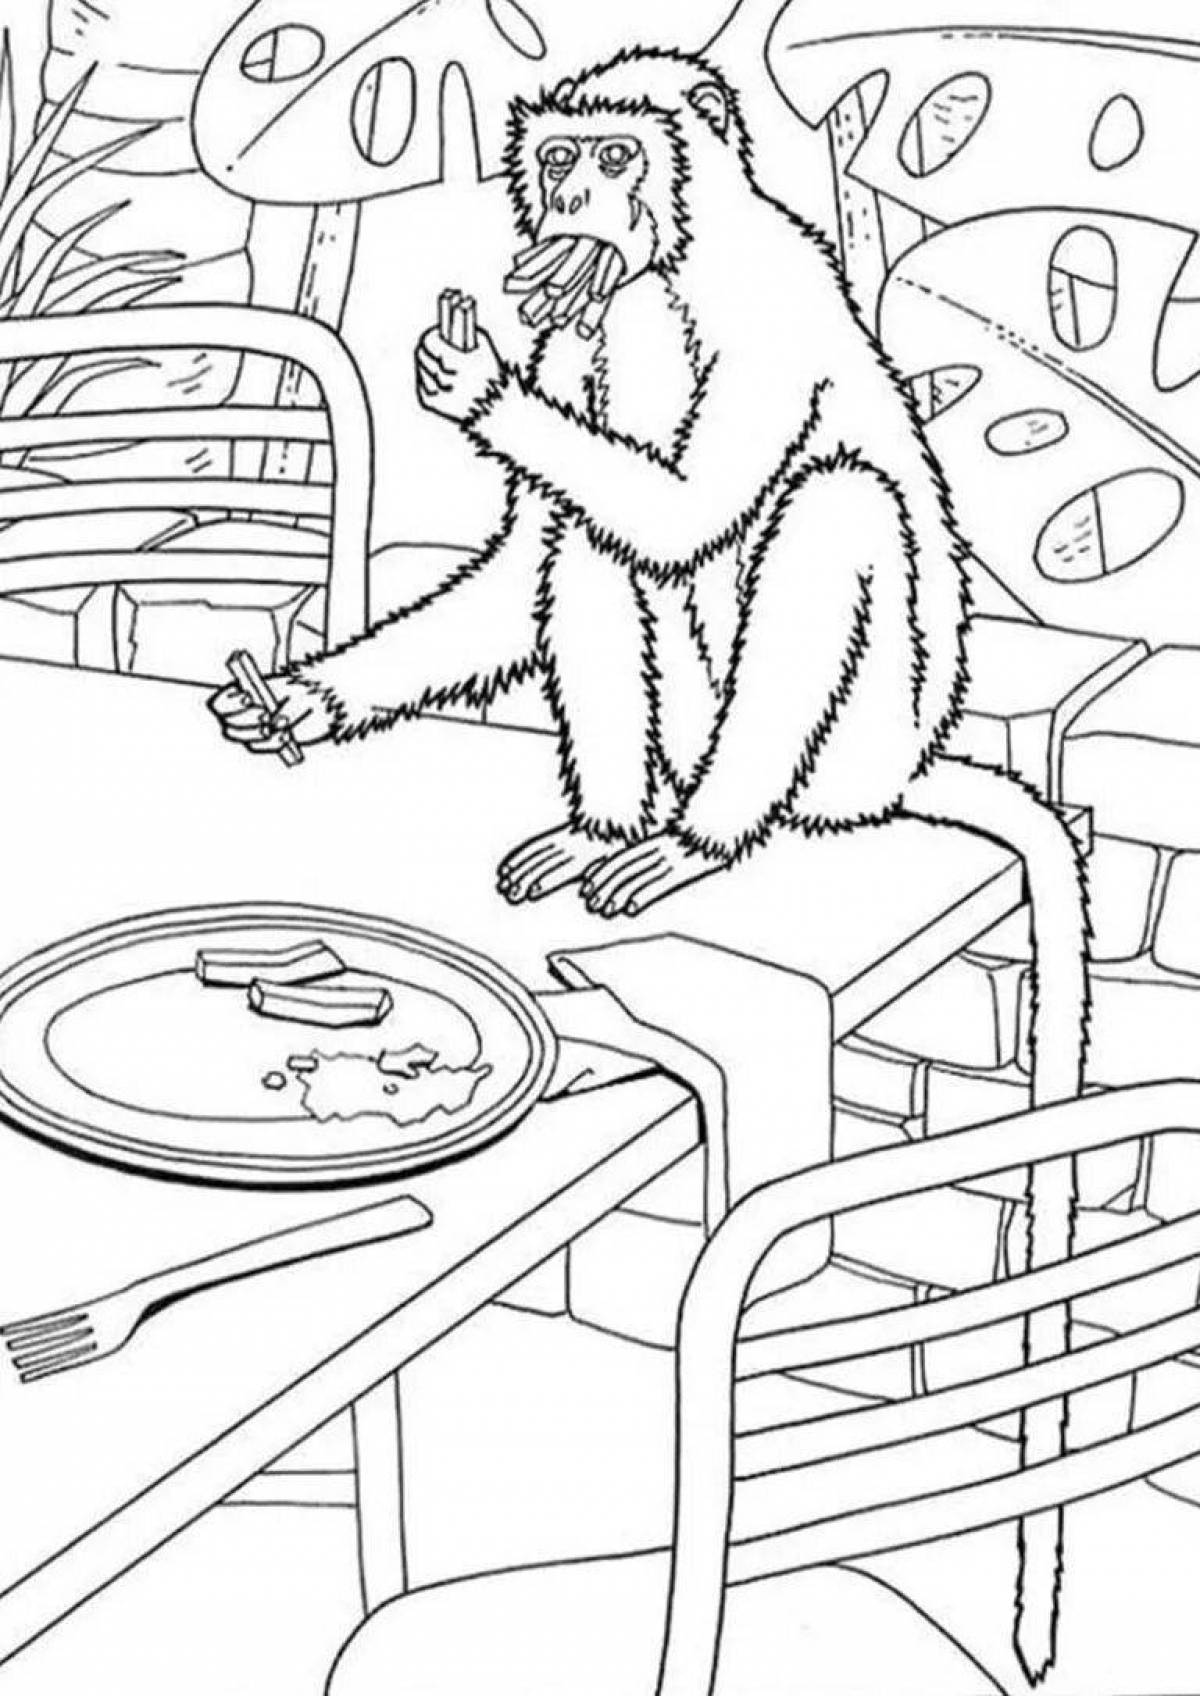 Coloring book exquisite zhitkov monkey